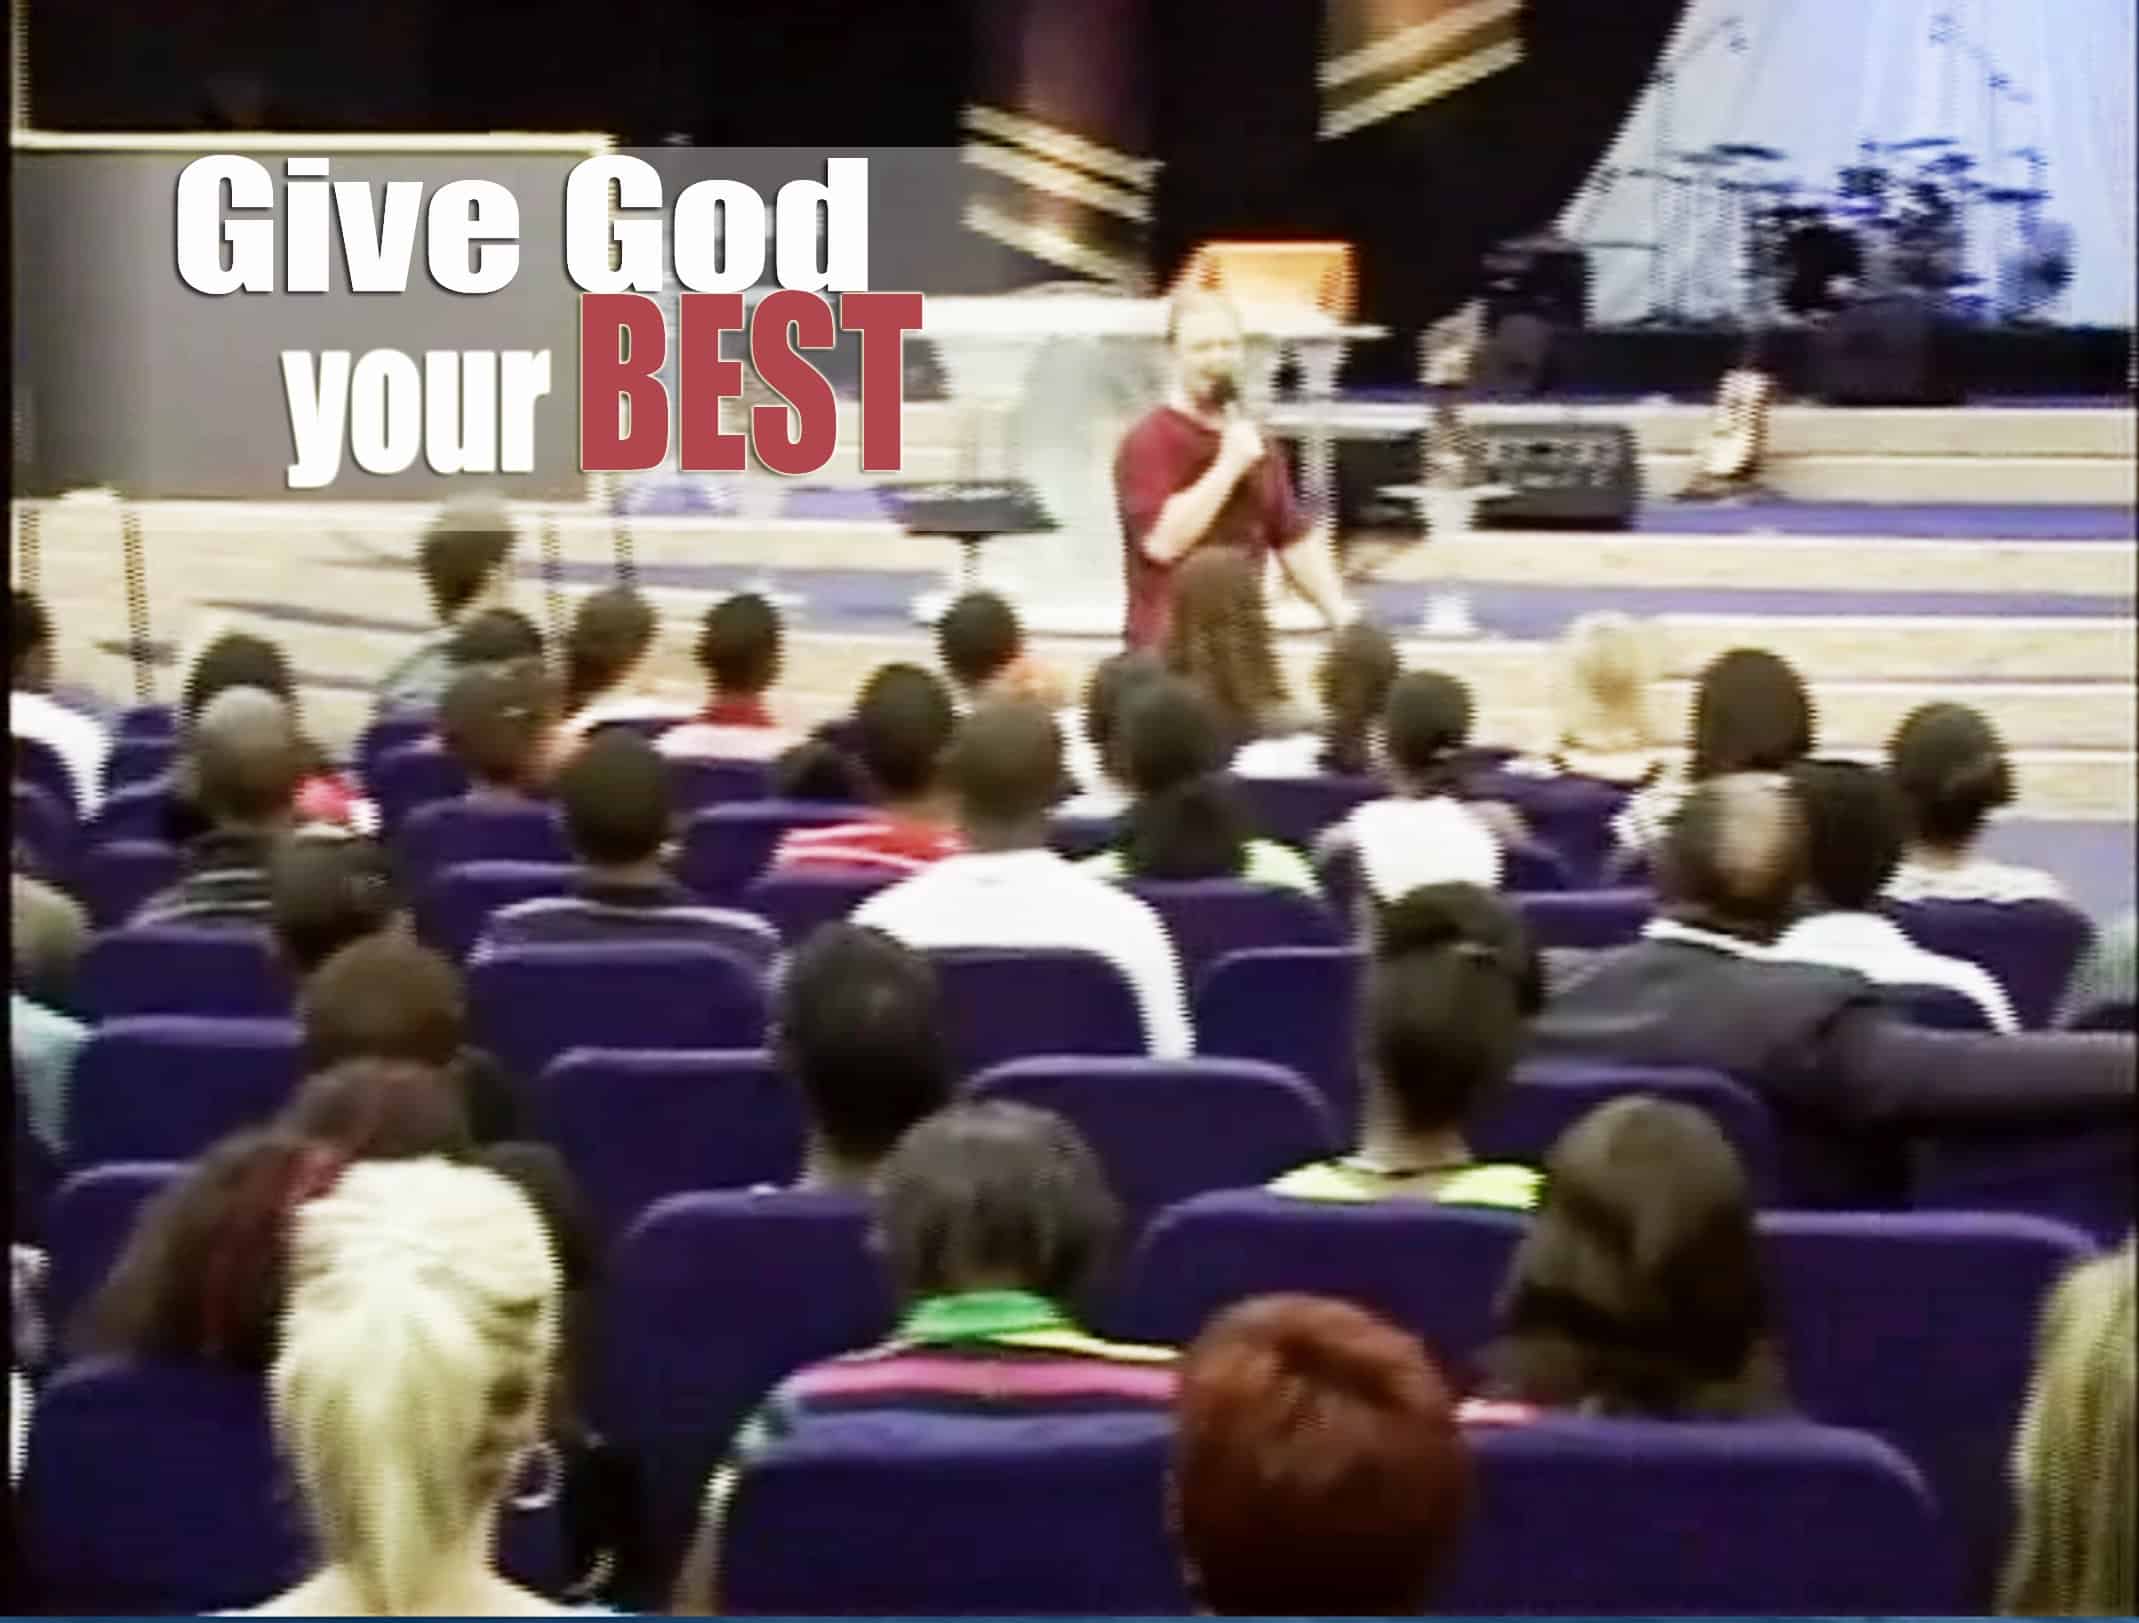 GIVE GOD YOUR BEST IN EVERYTHING – TOM SCARRELLA